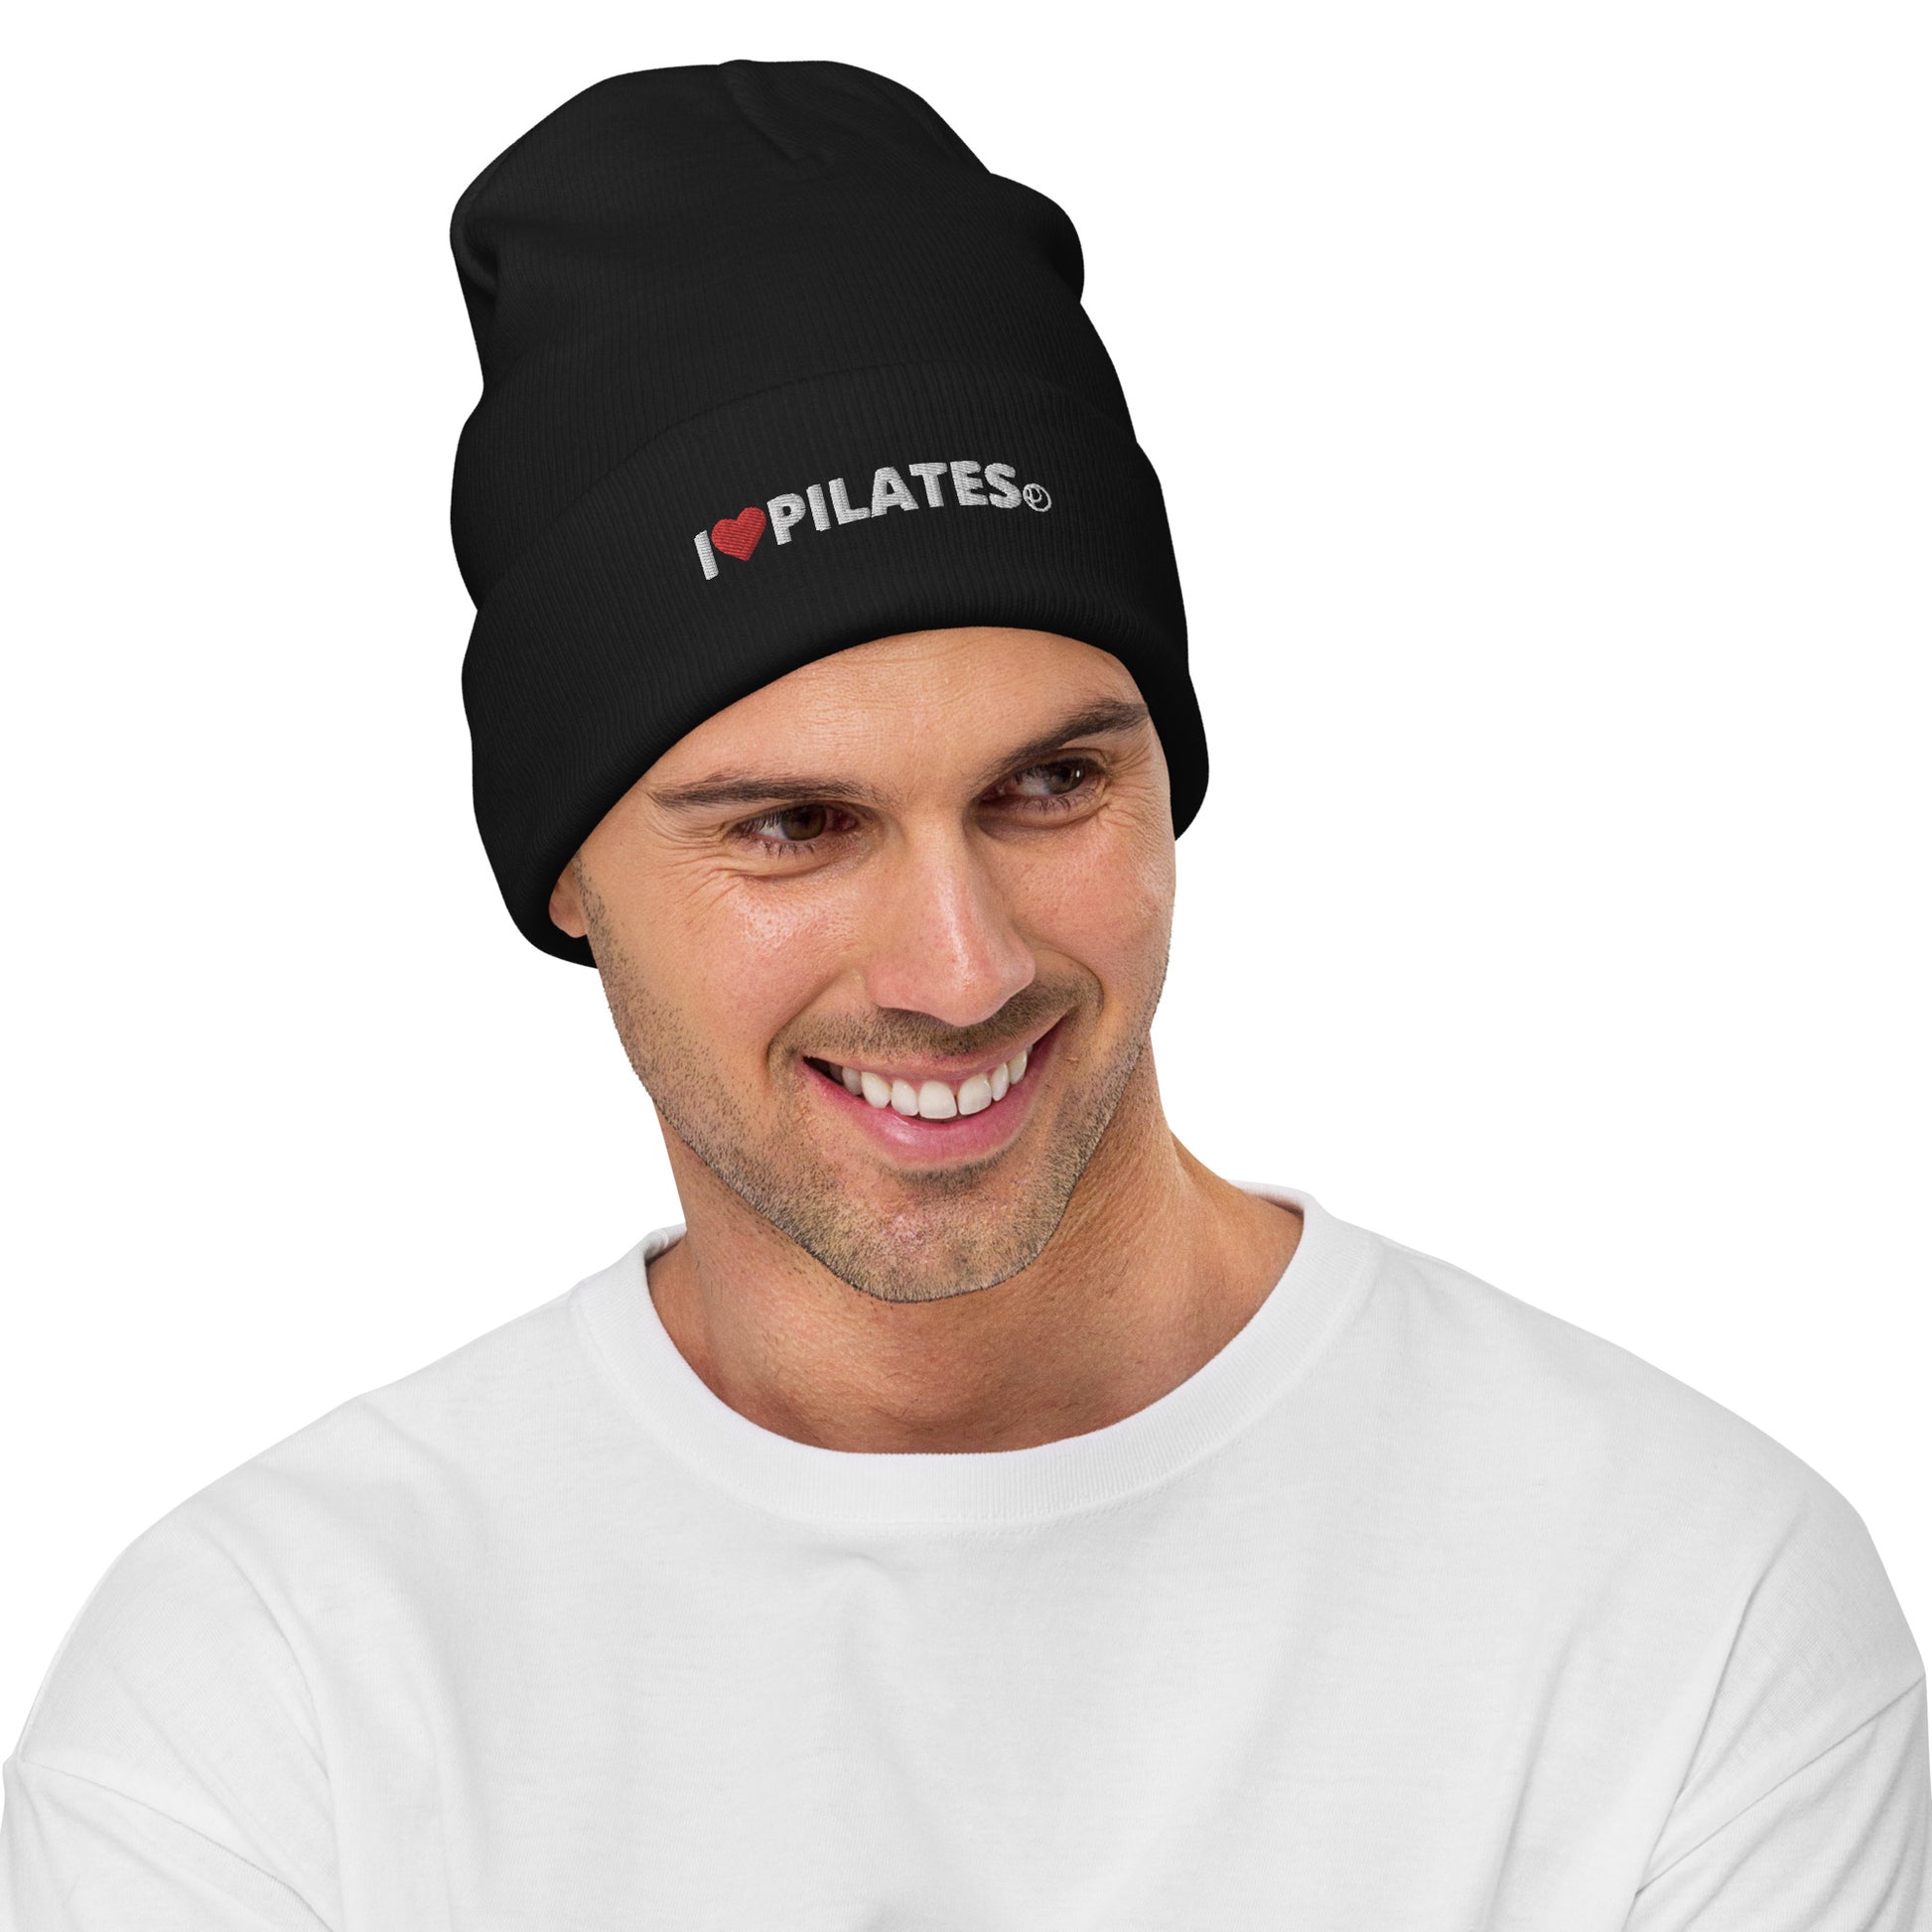 I love Pilates embroidered beanie - Pilates hat - Pilates gifts for men and women by pilatay 